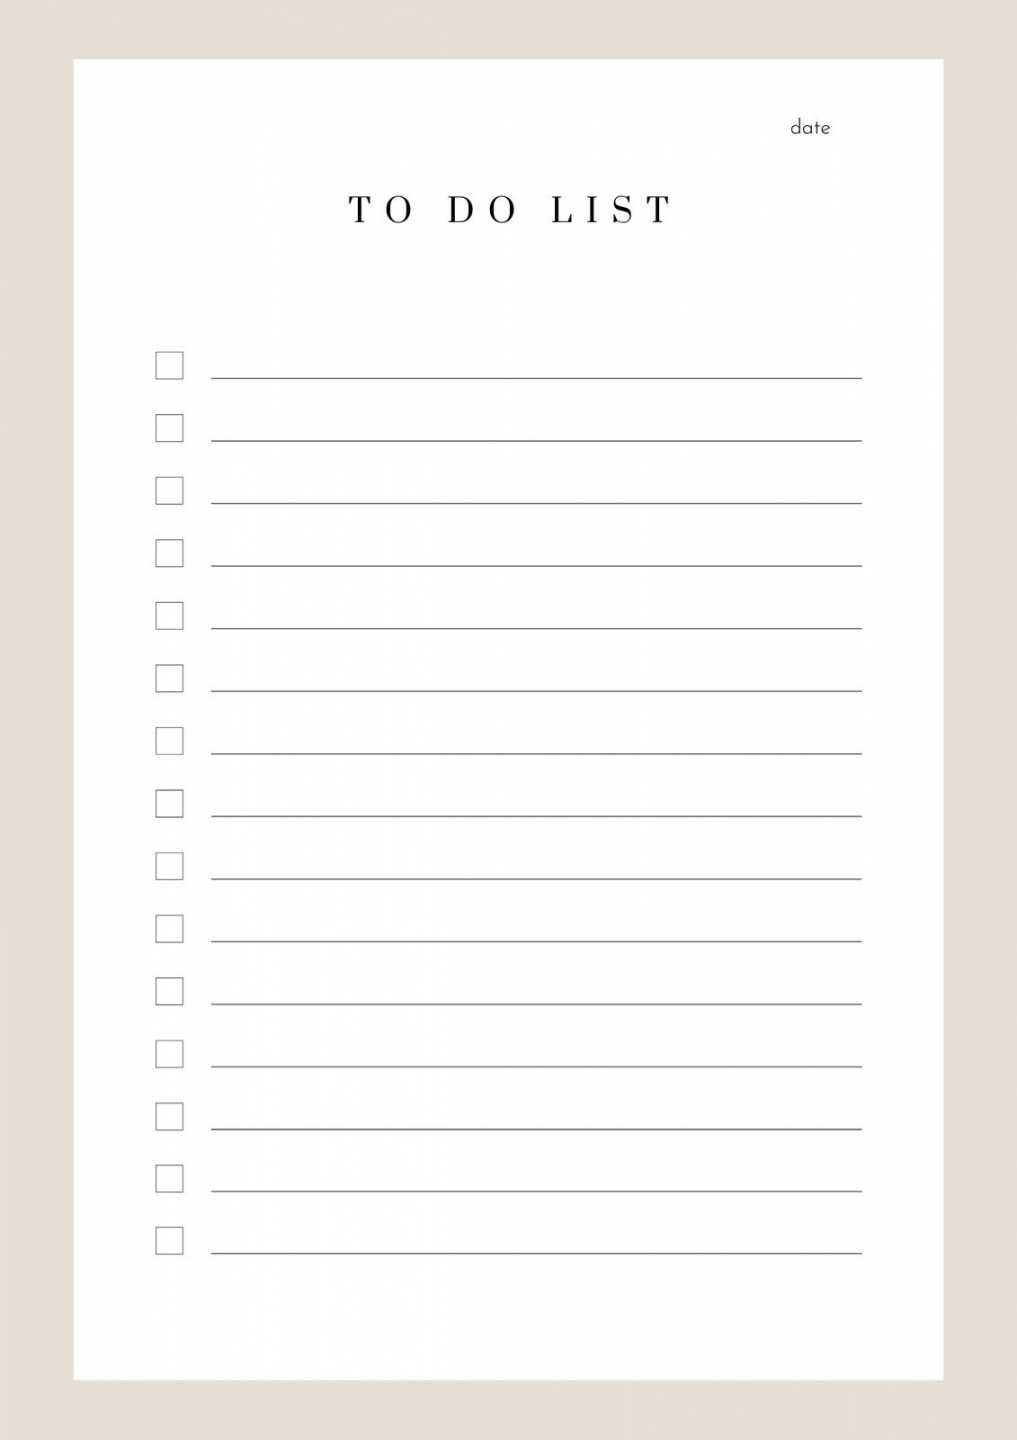 Free and customizable to do list templates - FREE Printables - Printable To Do List Free